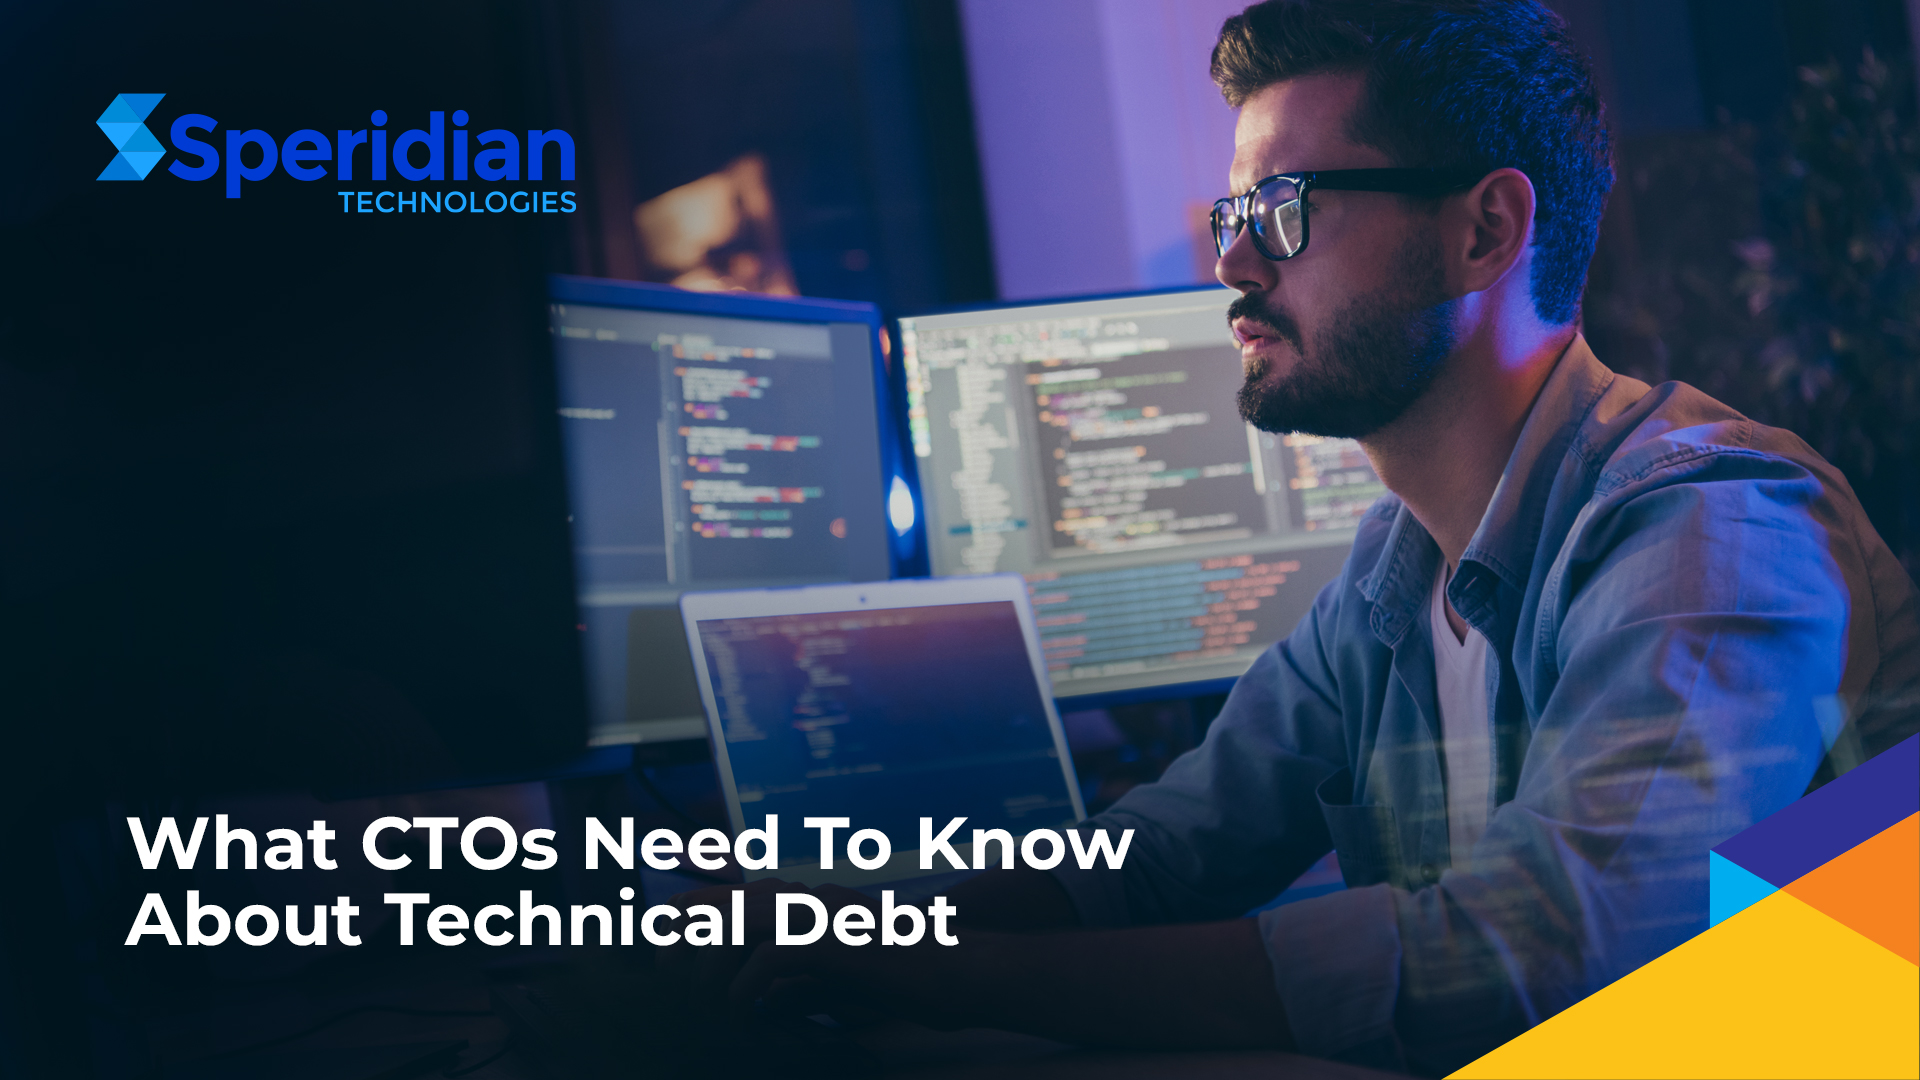 What CTOs Need To Know About Technical Debt